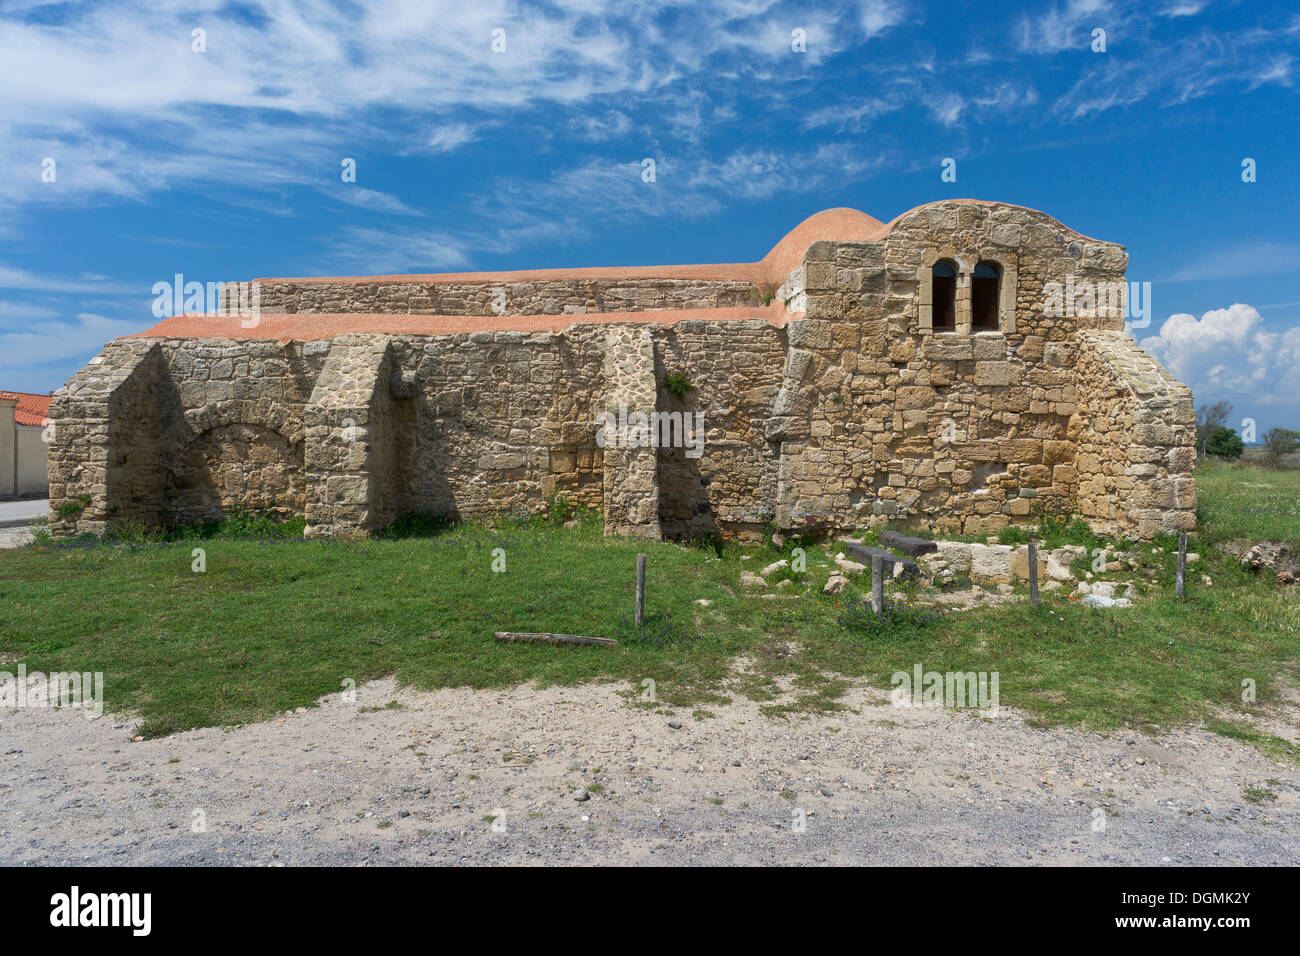 San Giovanni di Sinis, one of the oldest Byzantine churches in Sardinia, originated in the 6th or 7th century, Sinis Peninsula Stock Photo